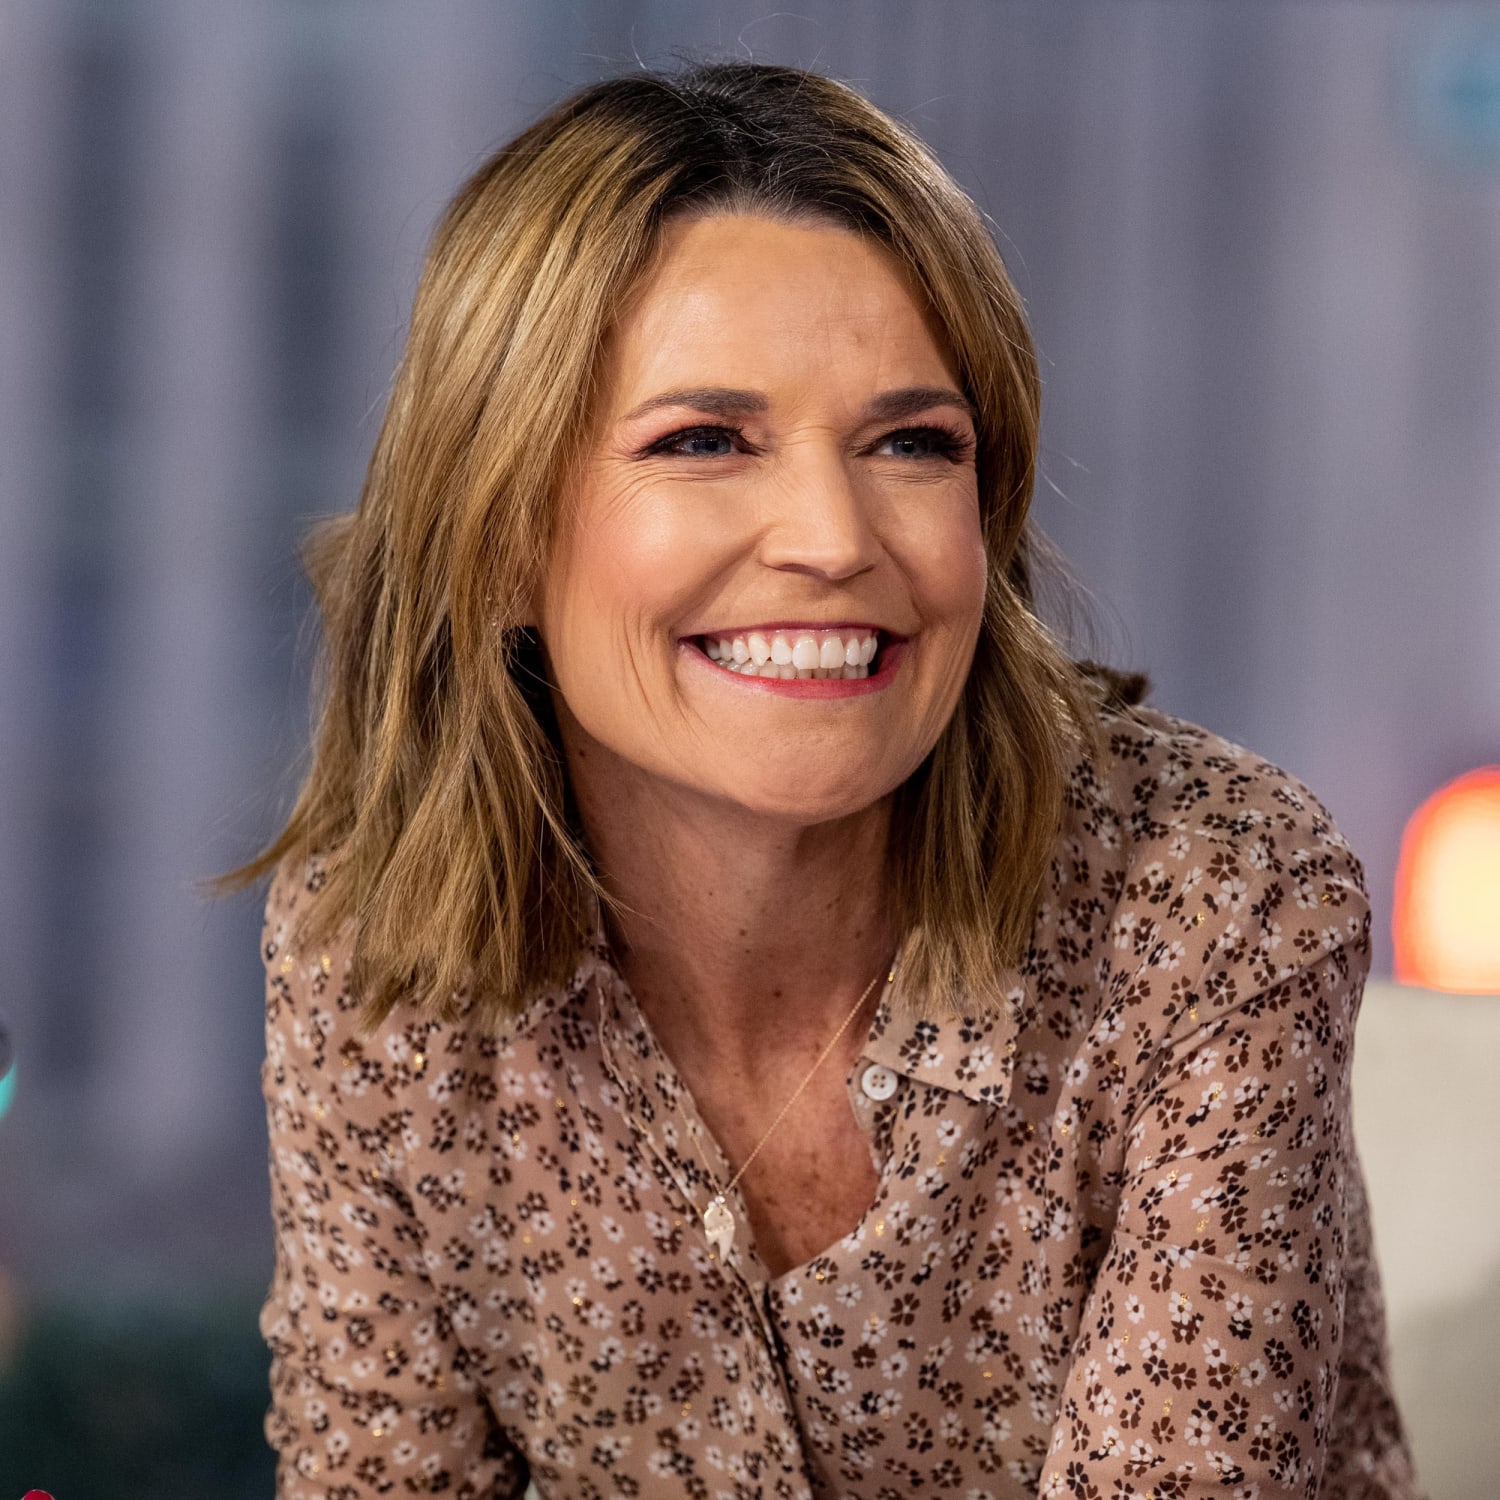 Savannah Guthrie Just Chopped Off Her HairSee Her Shorter Layered New Look